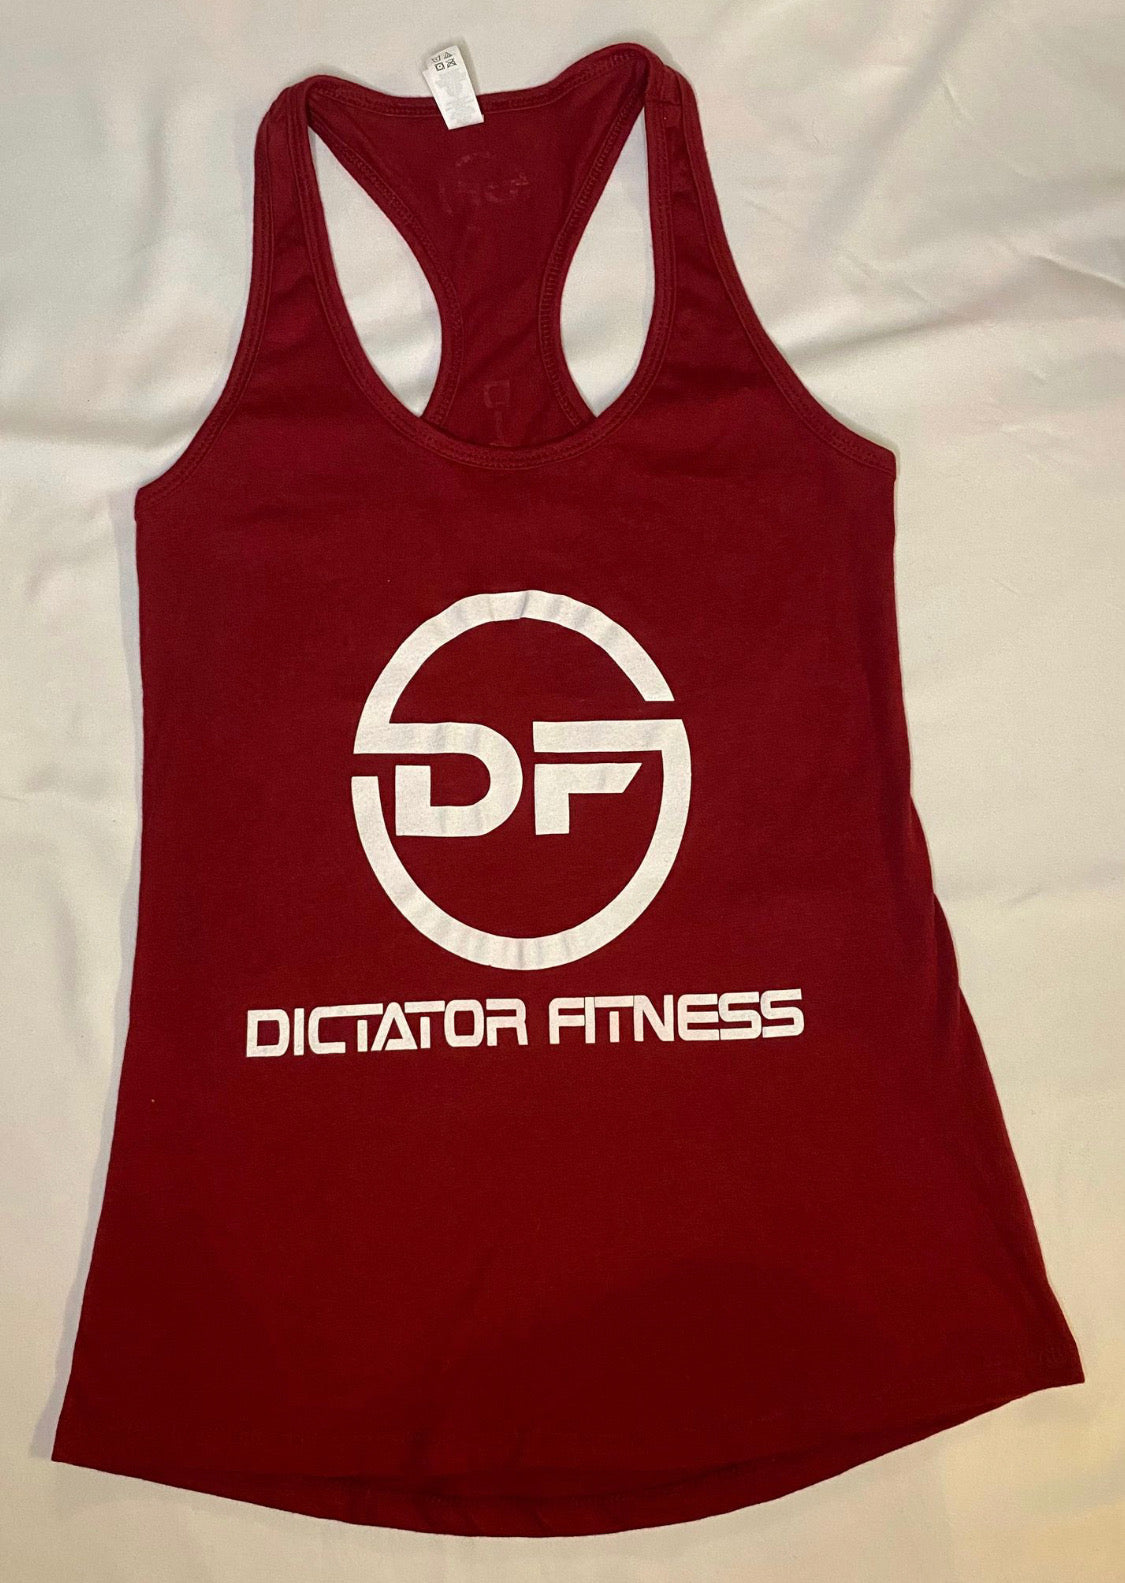 Dictator Fitness Racerback Red w/ White DF Logos